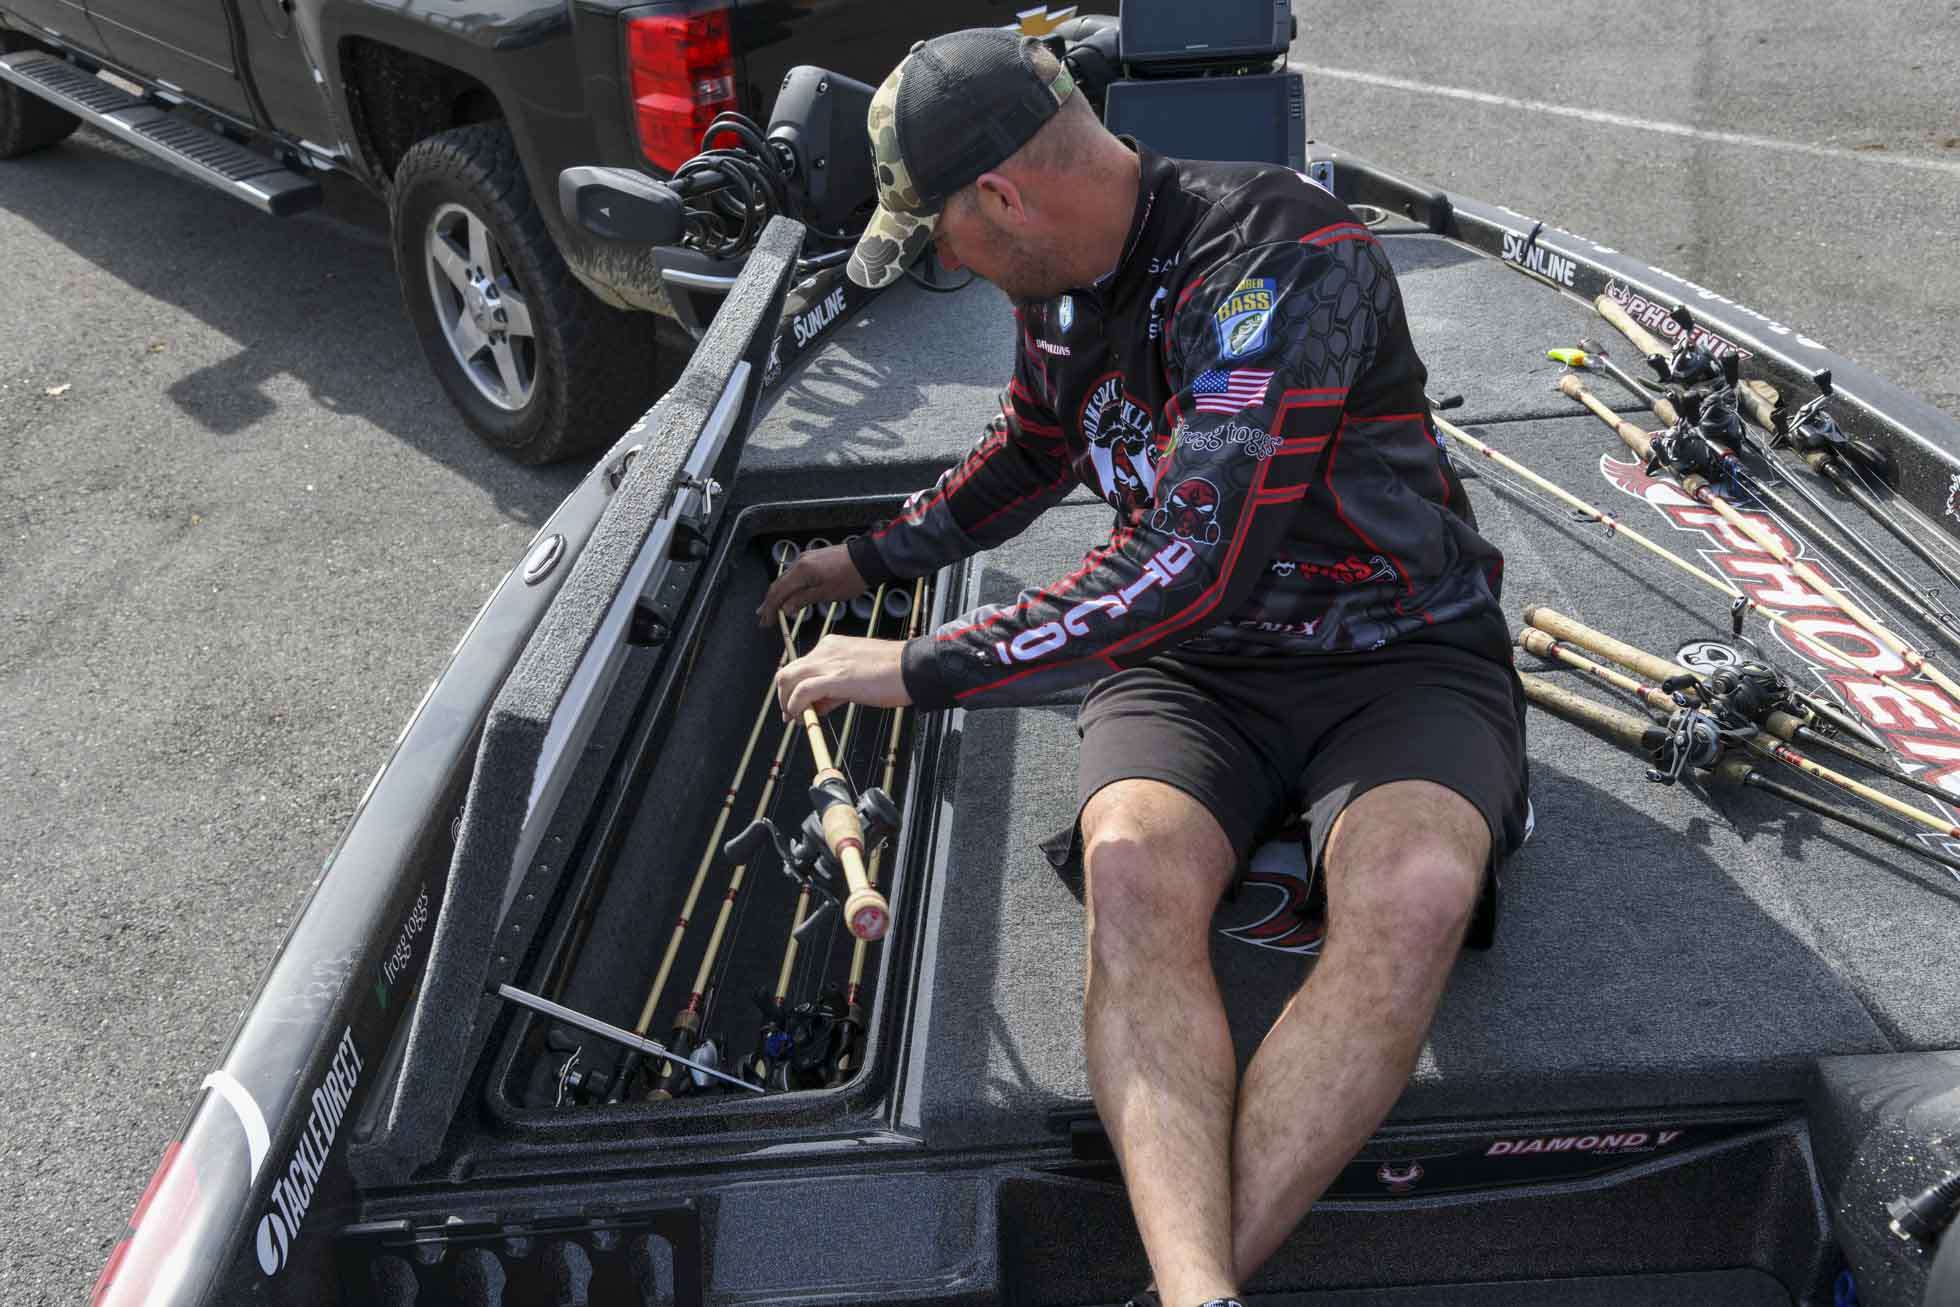 The port locker is filled with rods. The locker holds about 20 rods, so Mullins is never caught short. While he generally keeps the rods he expects to use on the deck during a competition day, he keeps extra rods stored in the locker.